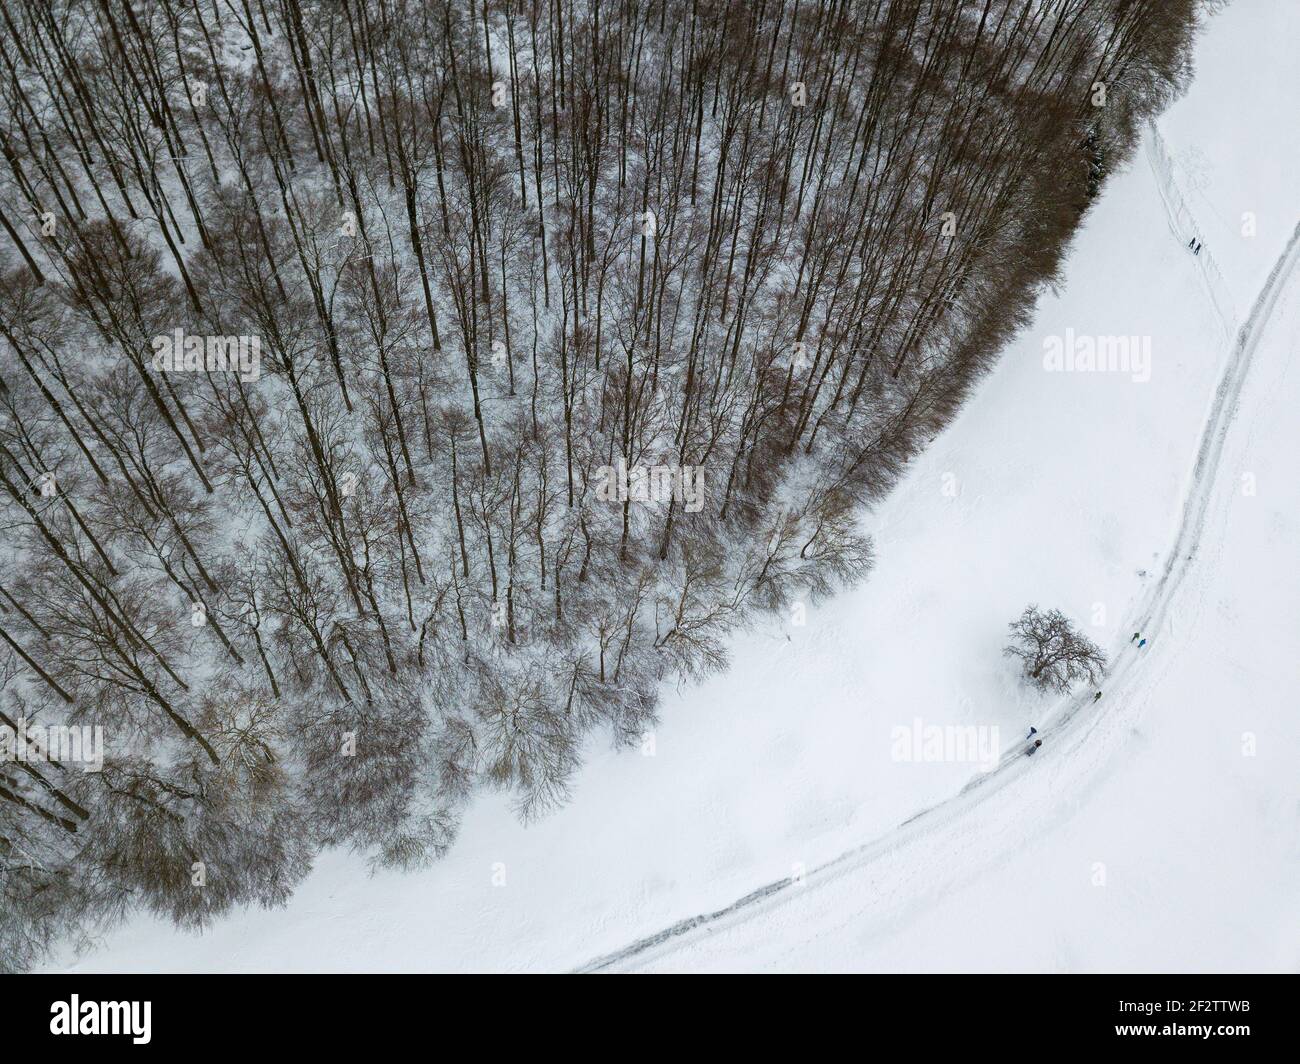 Aerial view on winter landscape with trees in deciduous forest covered with hoarfrost and people walking through snow covered path Stock Photo